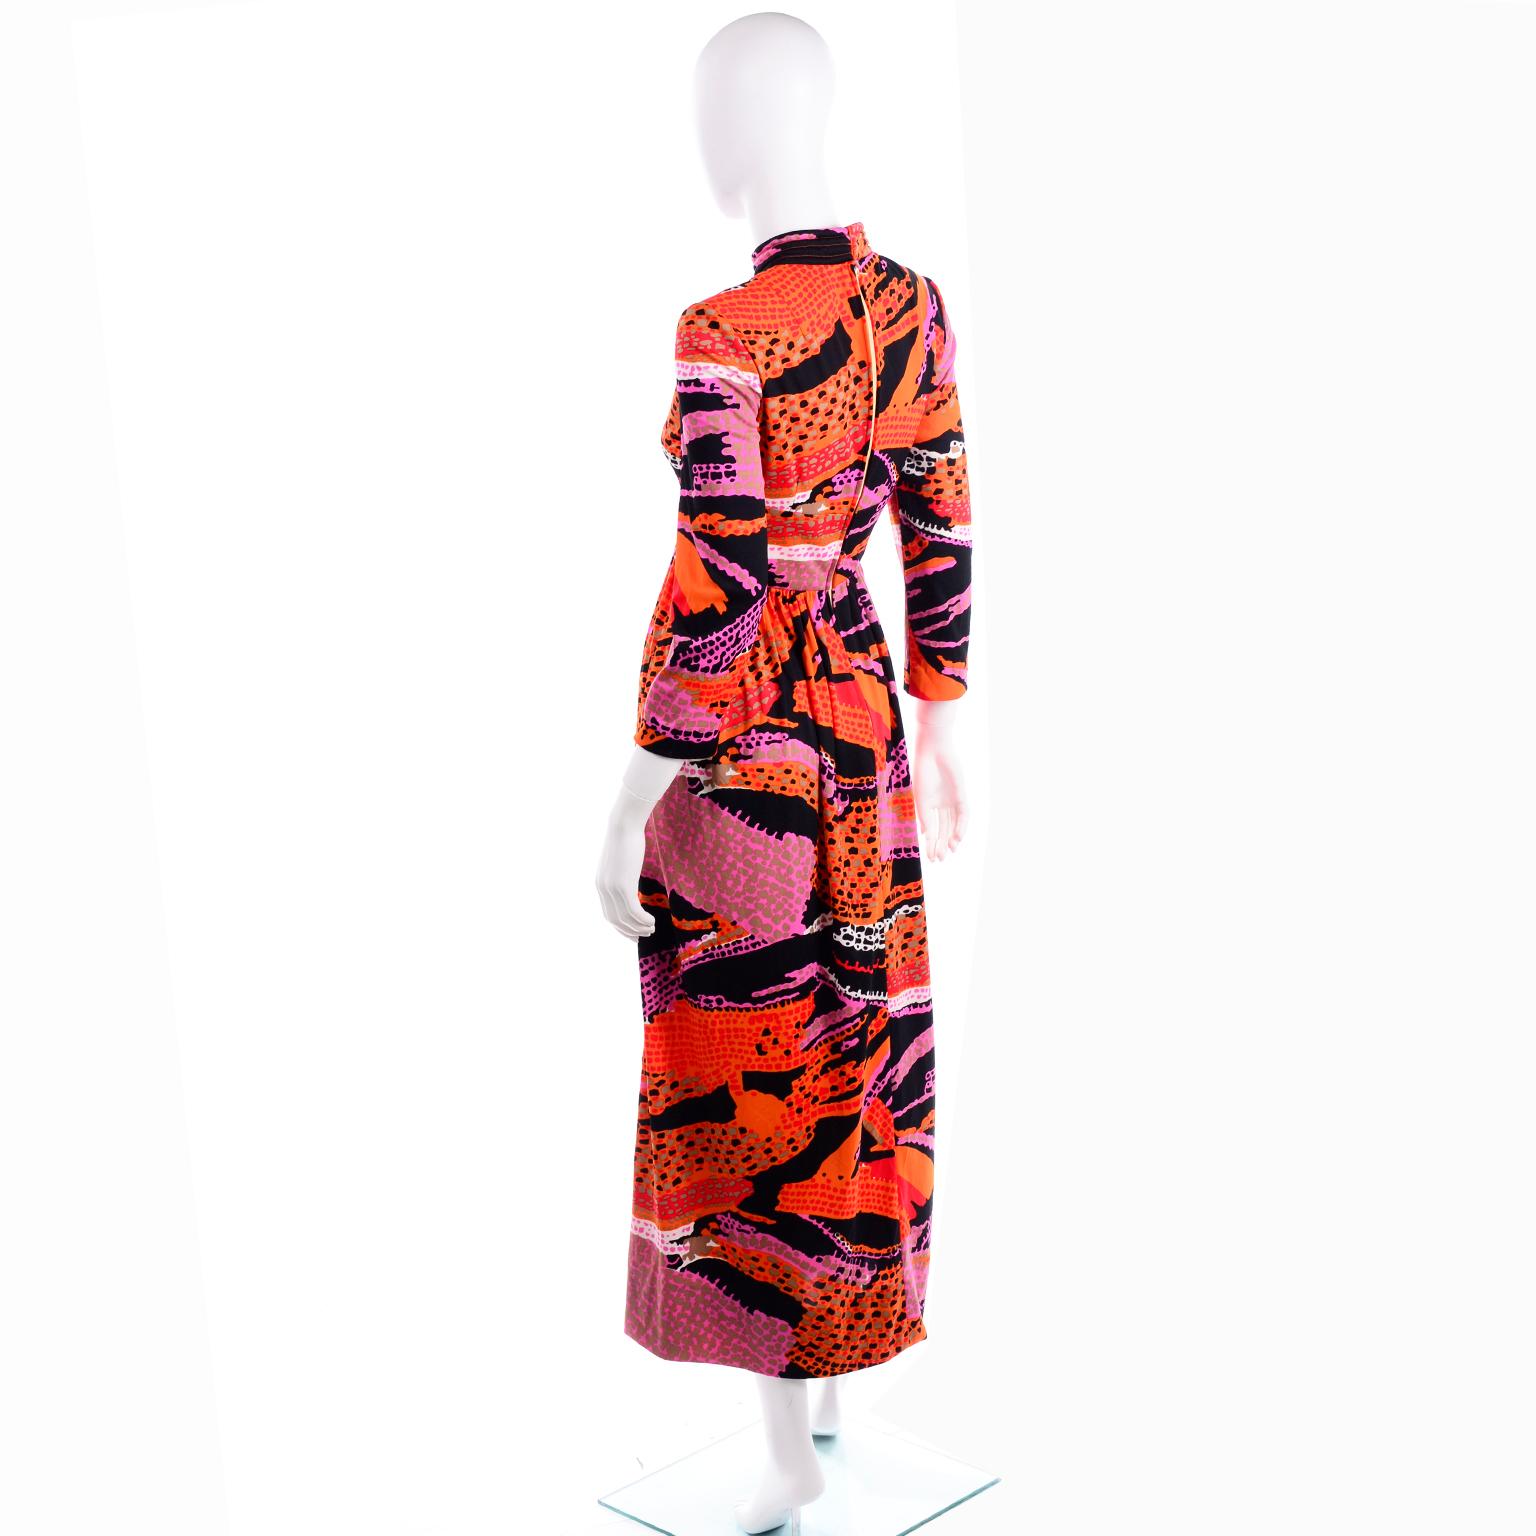 1970s Dynasty Vintage Maxi Dress in Mod Red Orange Pink & Black Abstract Print  3